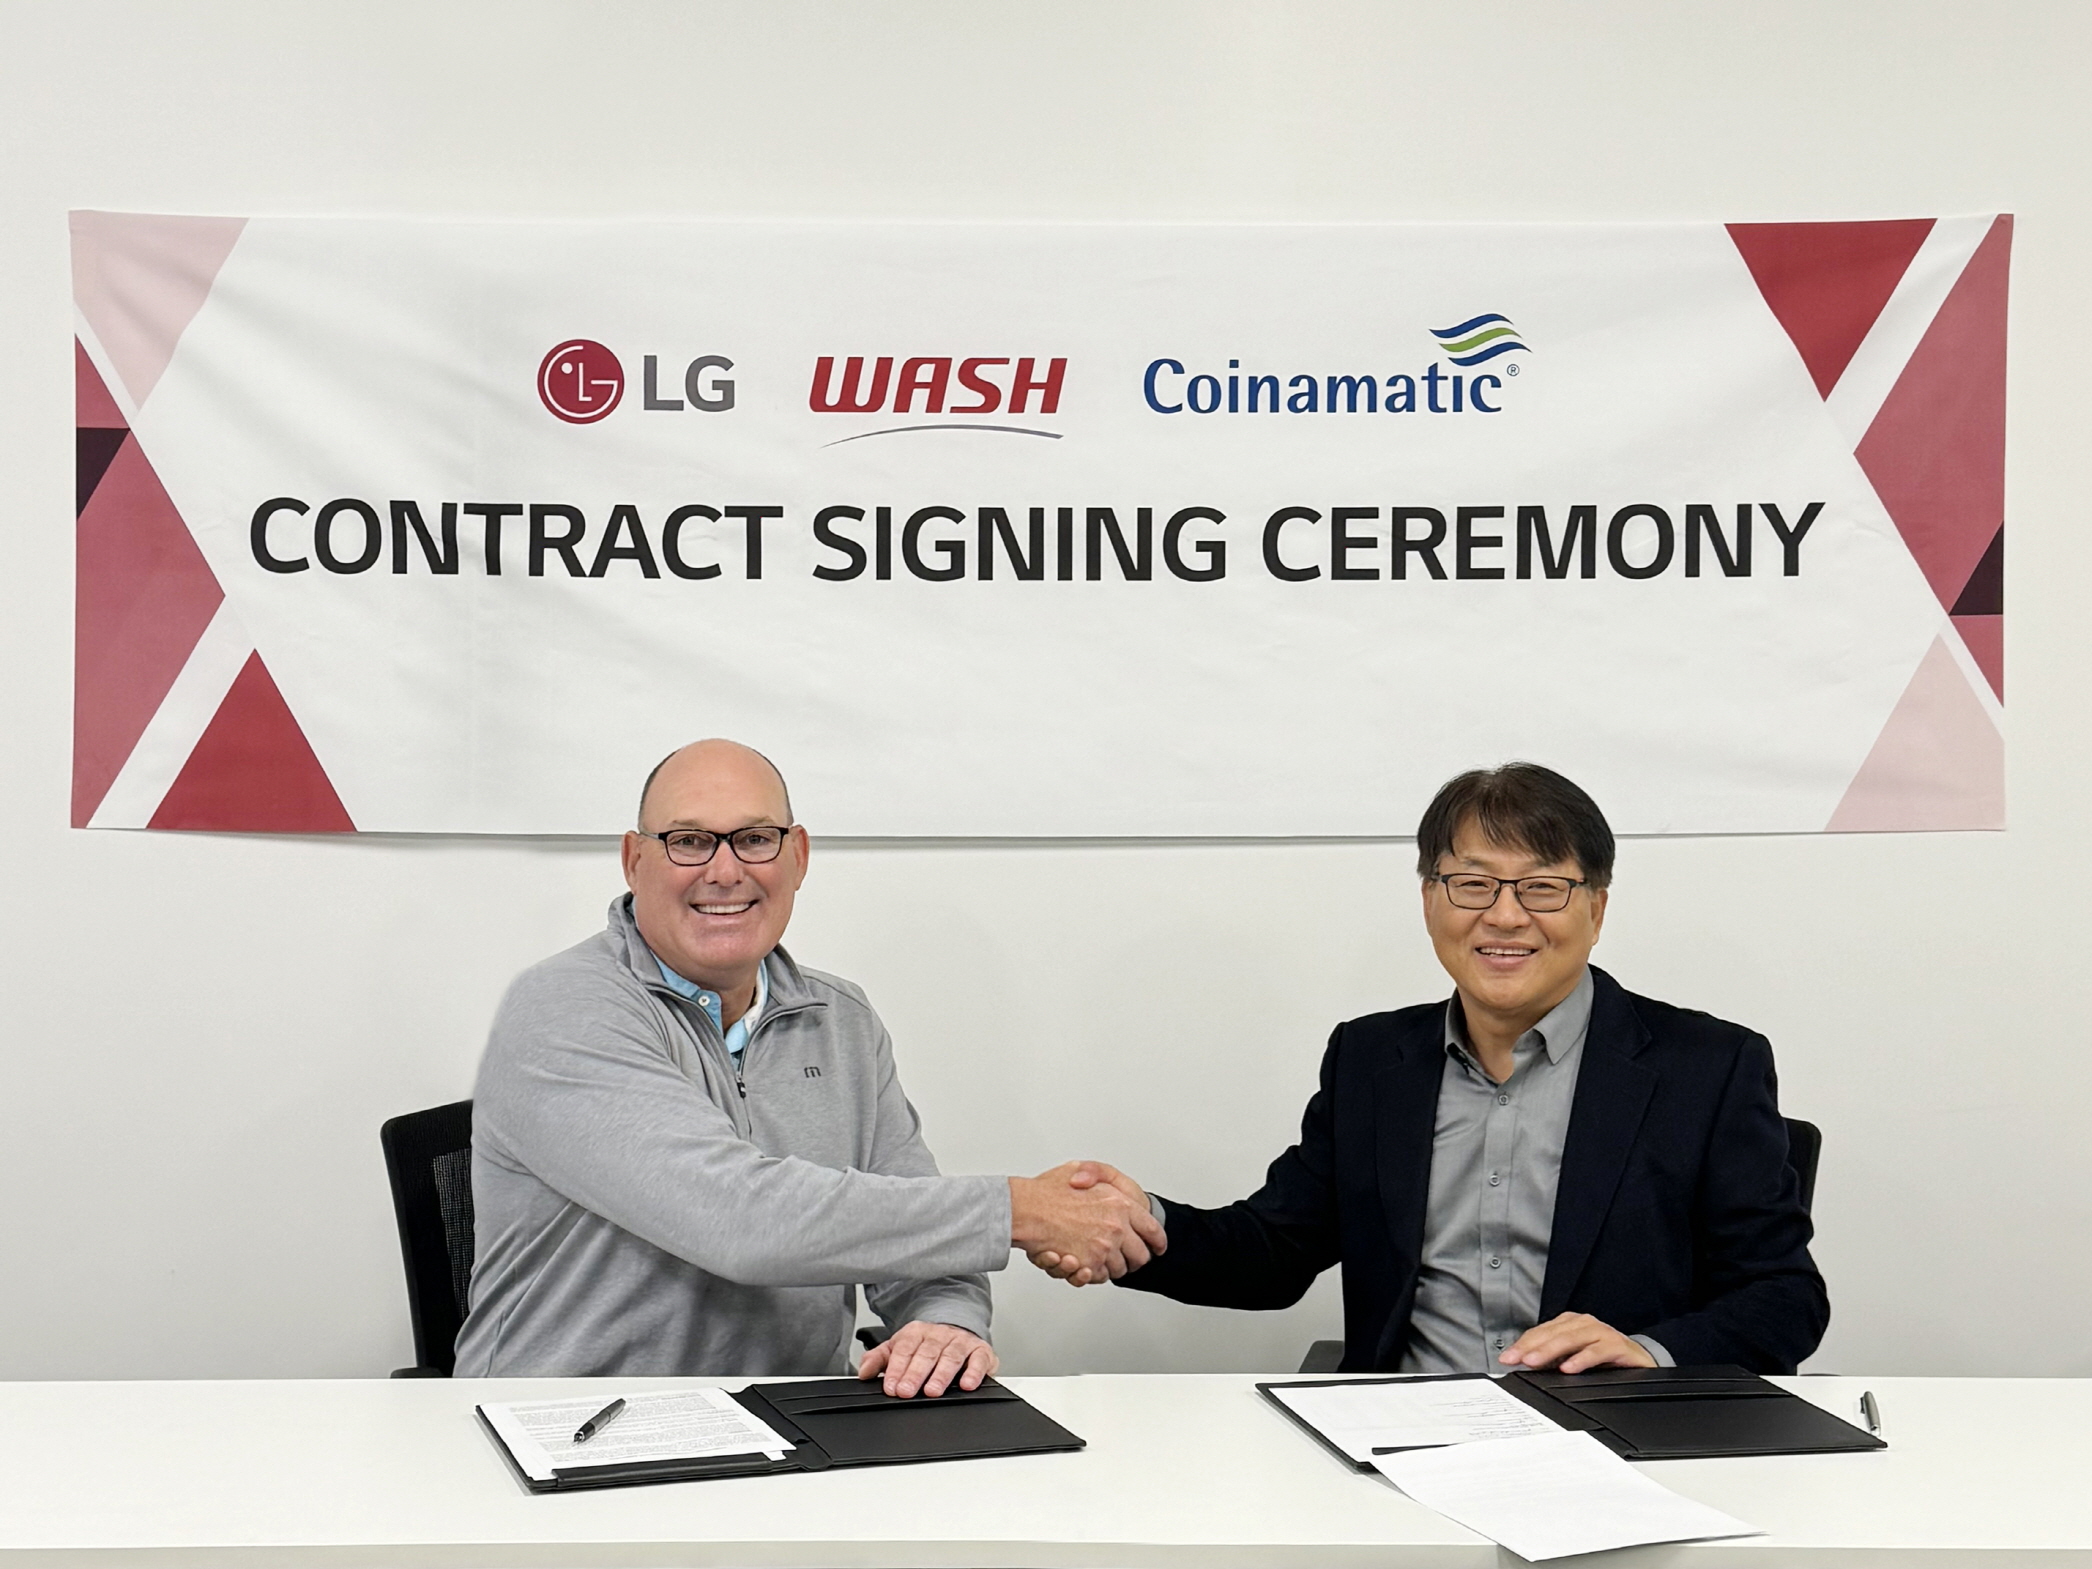 Wash and LG Strengthen Partnership to Offer Commercial Laundry Services in North America